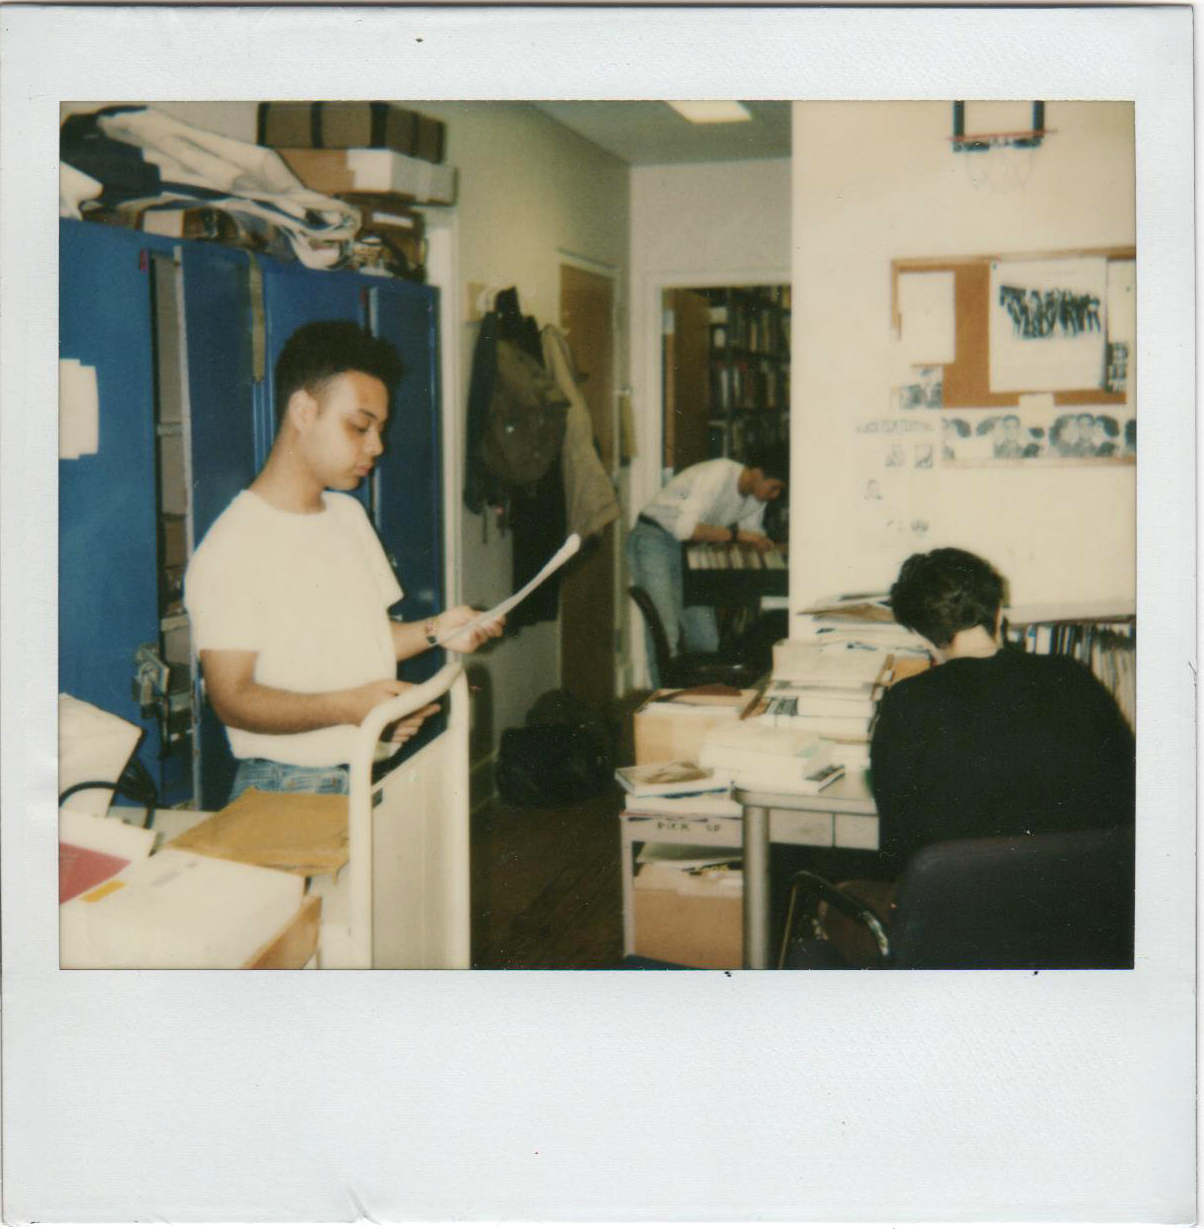 The Study Center in 1990.